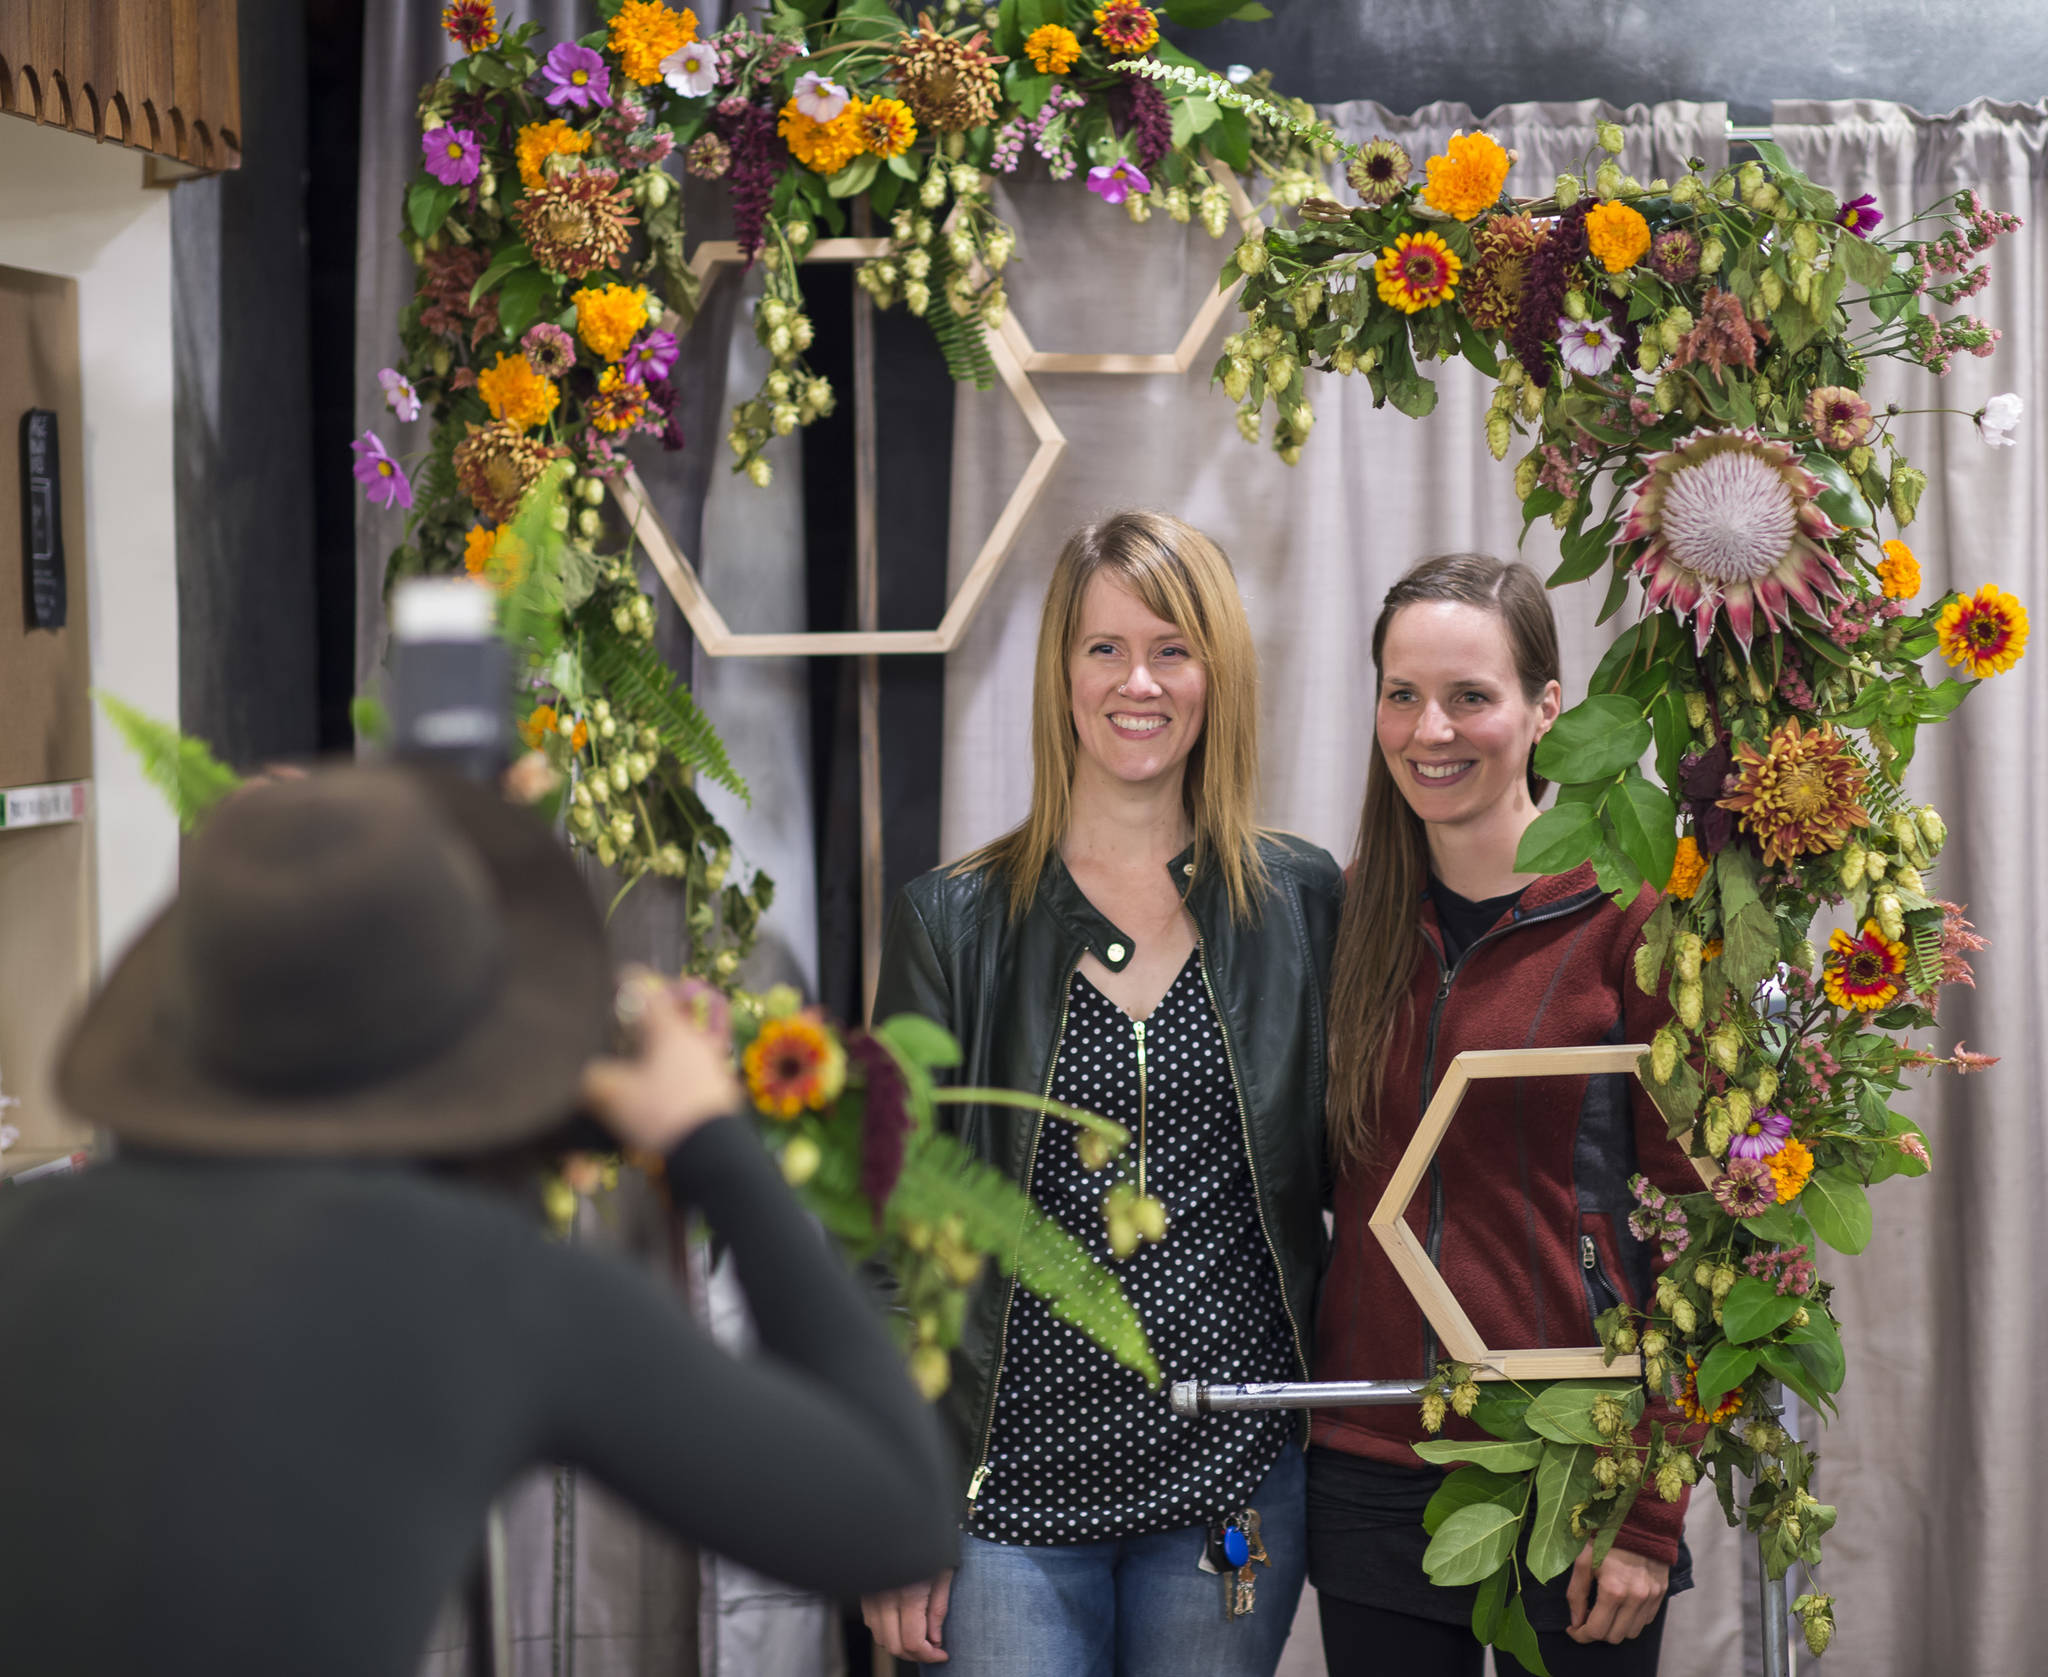 Photographer Kaley McGoey photographs Kelsey Smioley, center, and Kayla Koelling at the Fera + Frenchie’s Photobooth in Kindred Post during First Friday on Friday, Sept. 7, 2018. (Michael Penn | Juneau Empire)